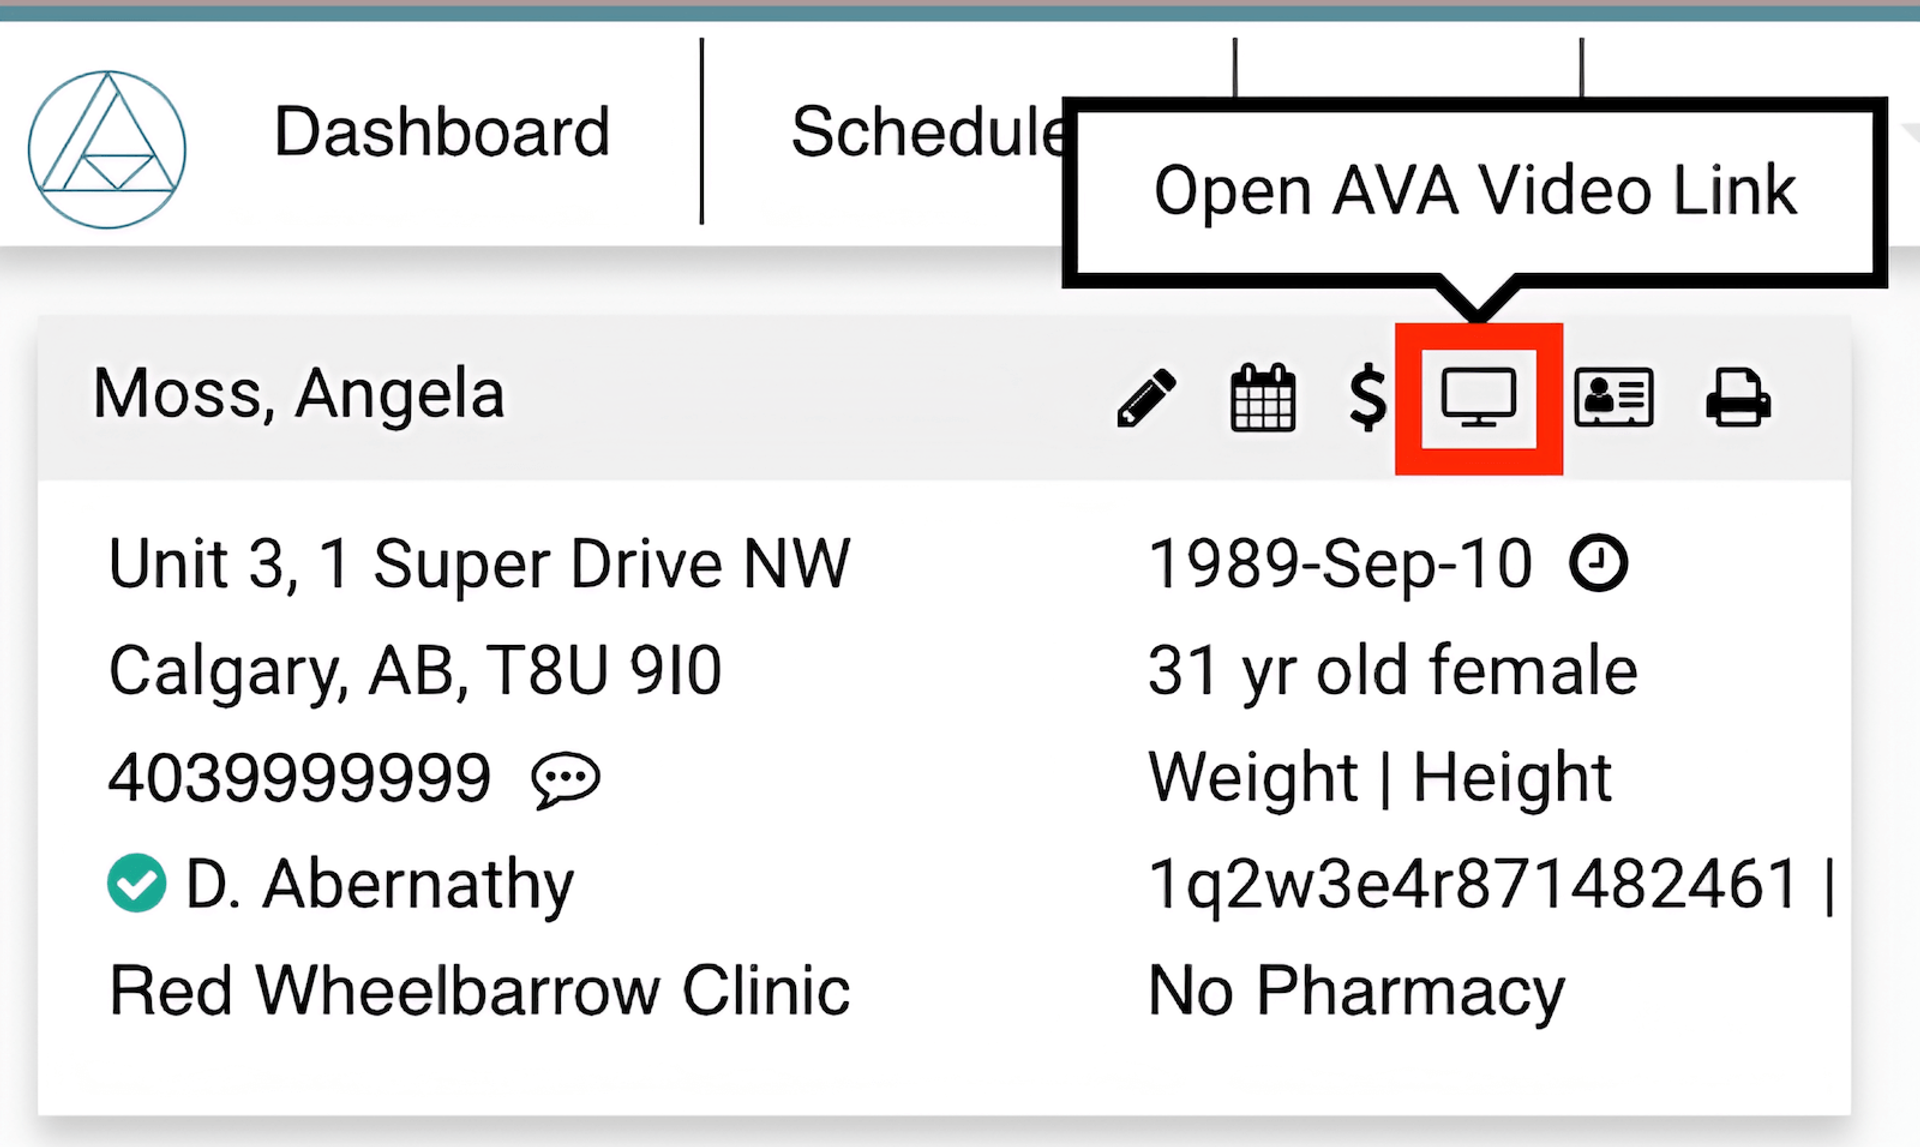 Ava dashboard with a highlighted square around the 'Open Ava Video Link' icon button.